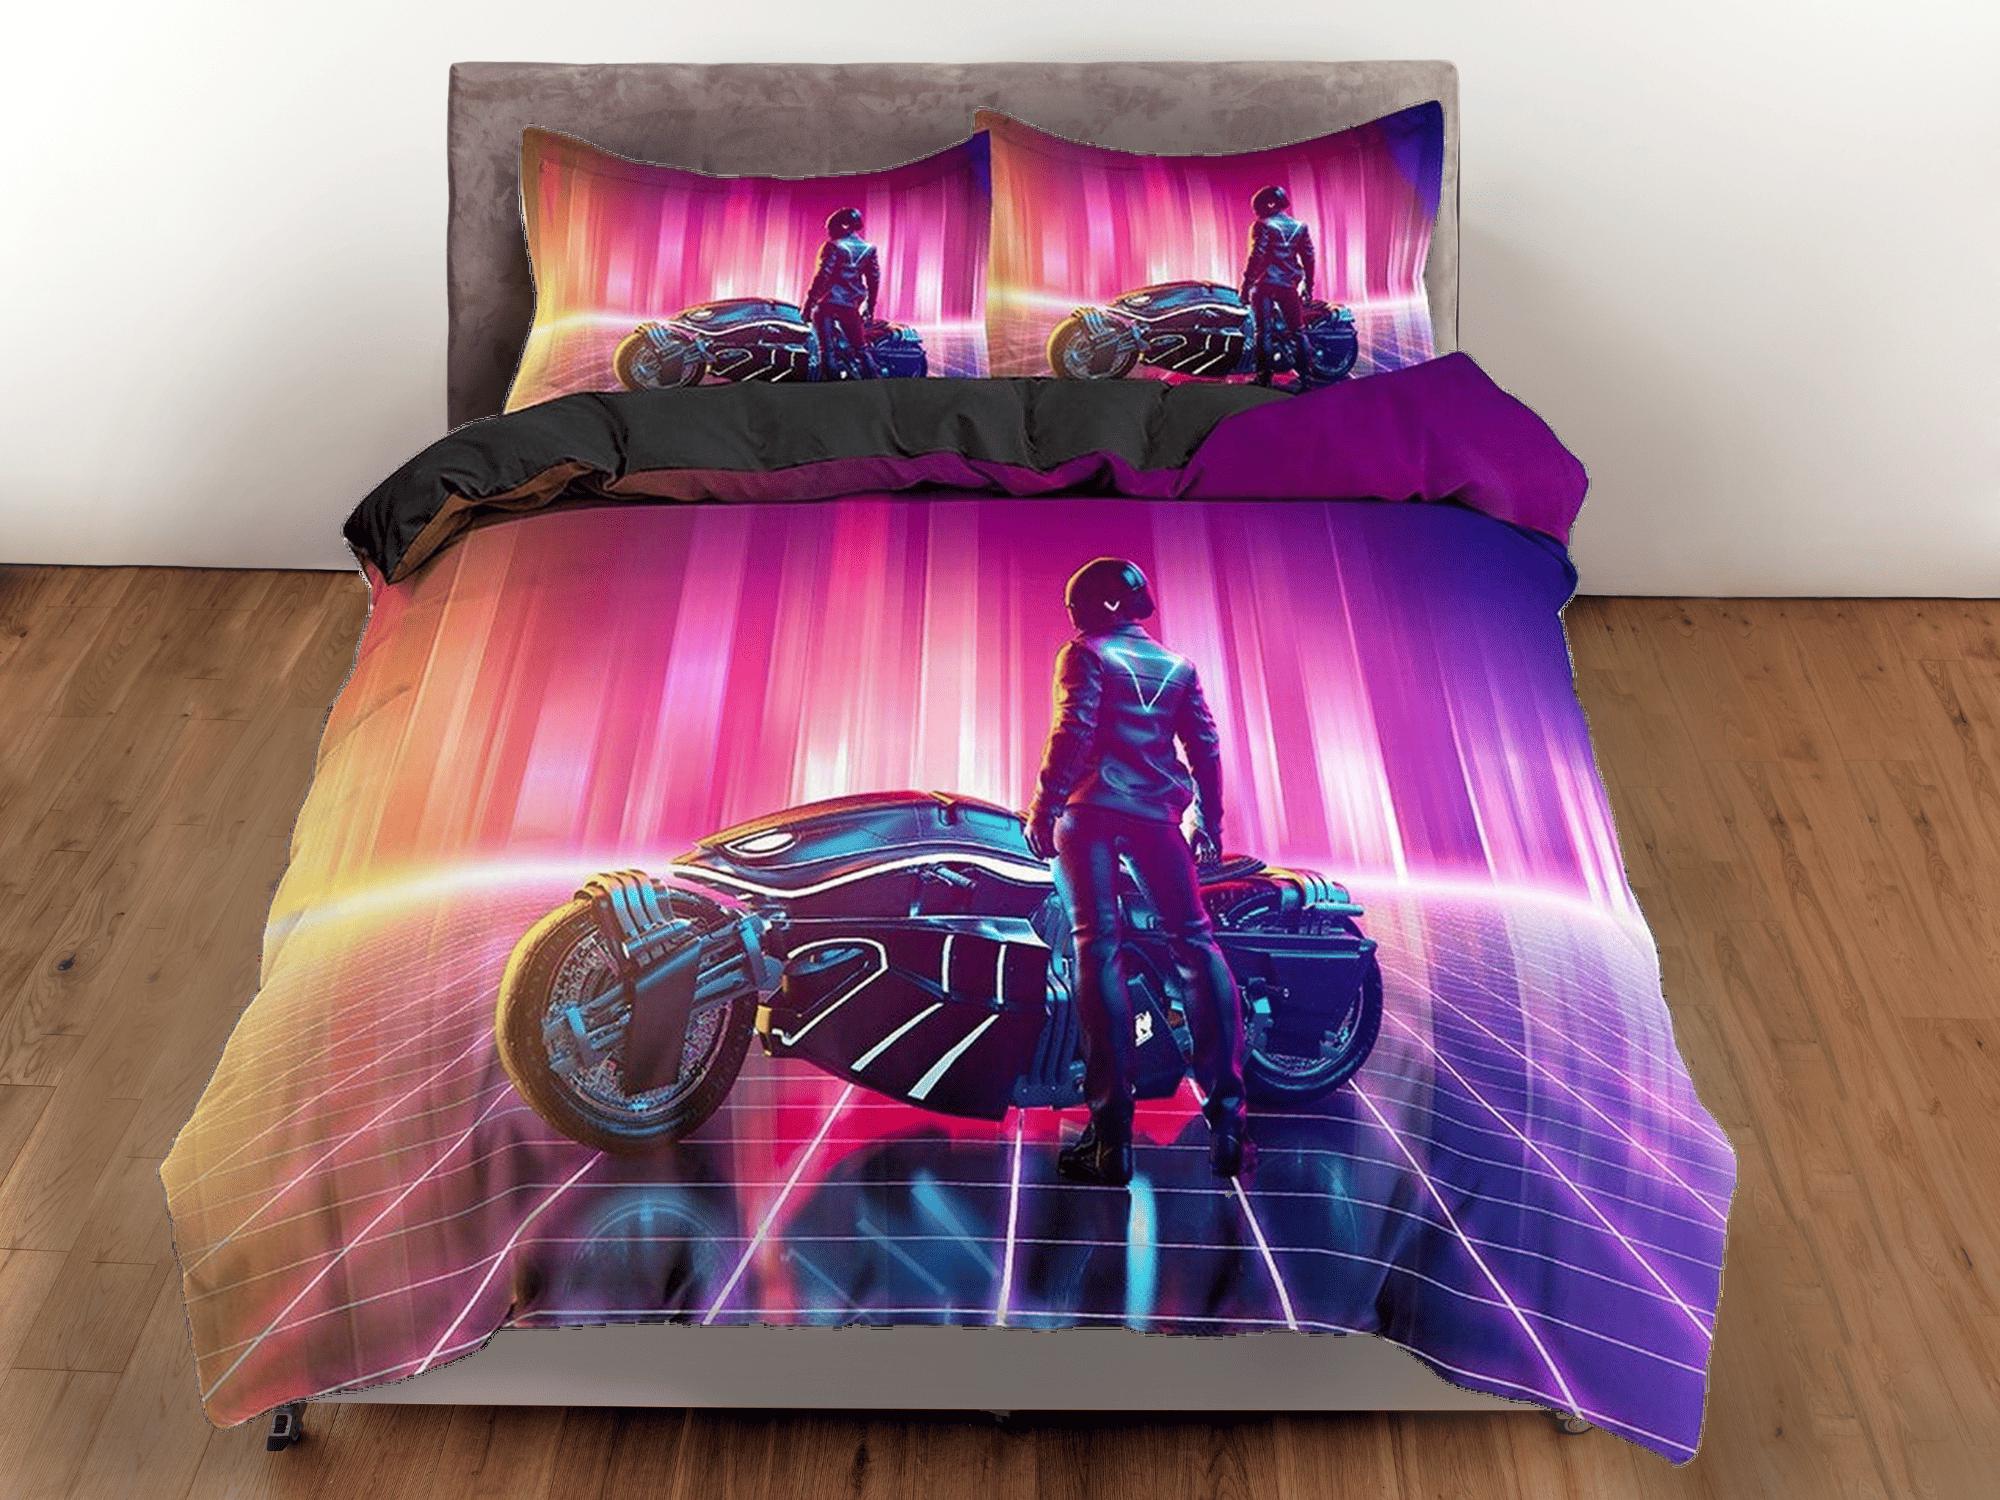 daintyduvet Vaporwave Motorcycle Rider Bedding, Cool Hippie Duvet Cover Set for Boys Bedroom, Trippy Psychedelic Bed Cover, Gradient Colors